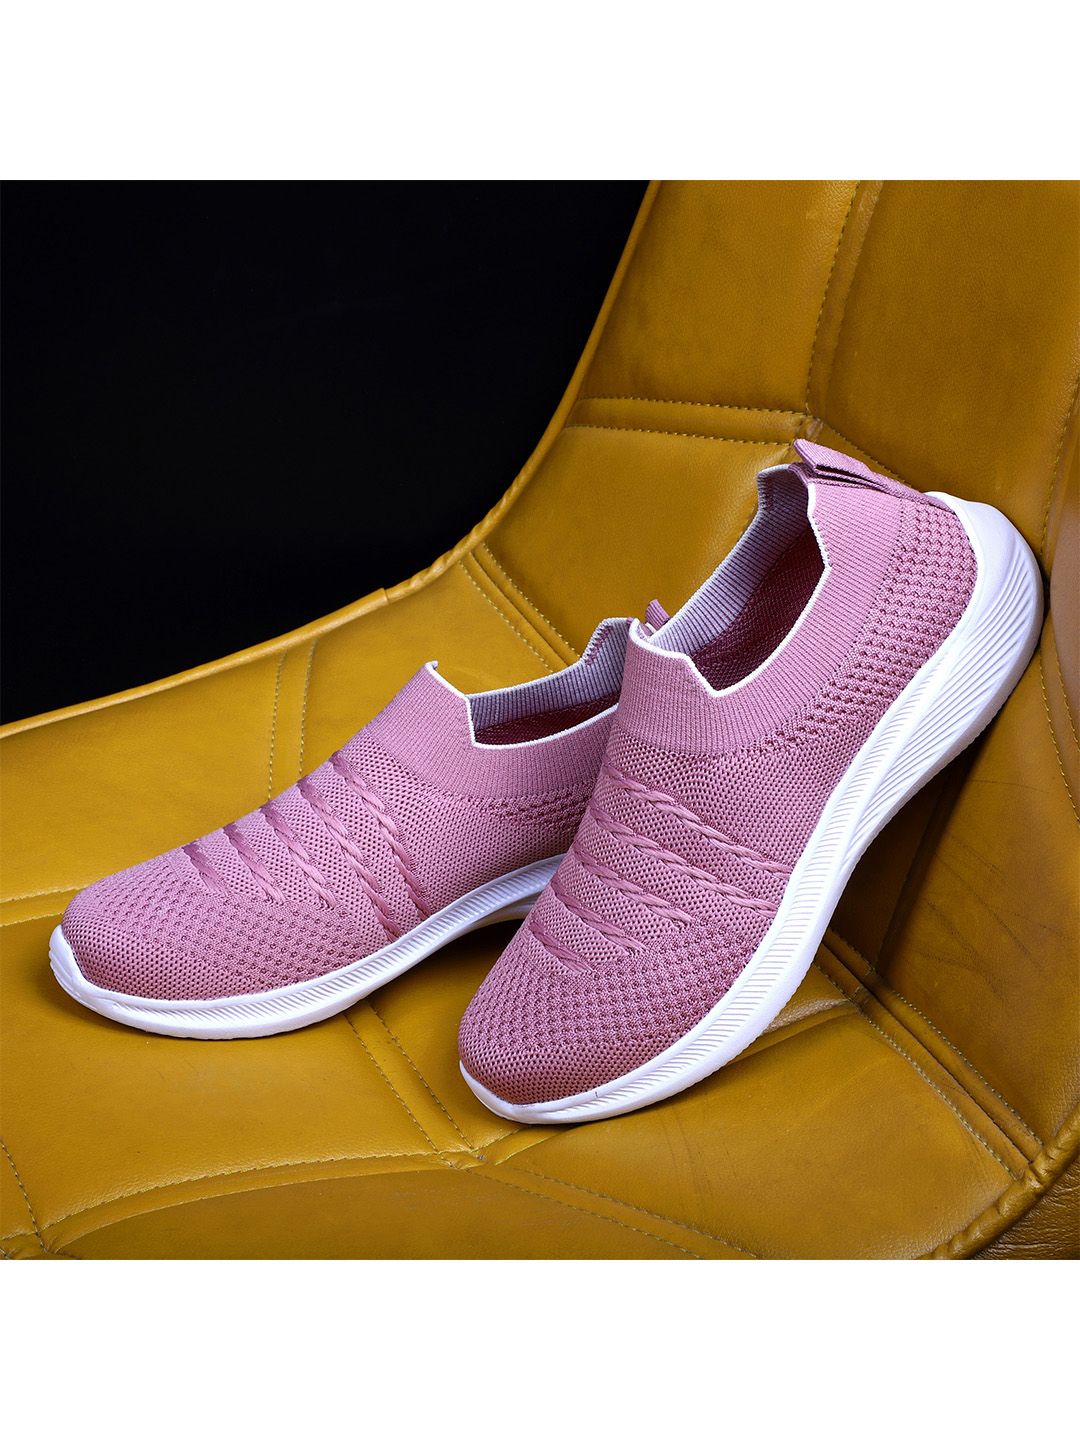 TPENT Women Rose Mesh Running Non-Marking Shoes Price in India